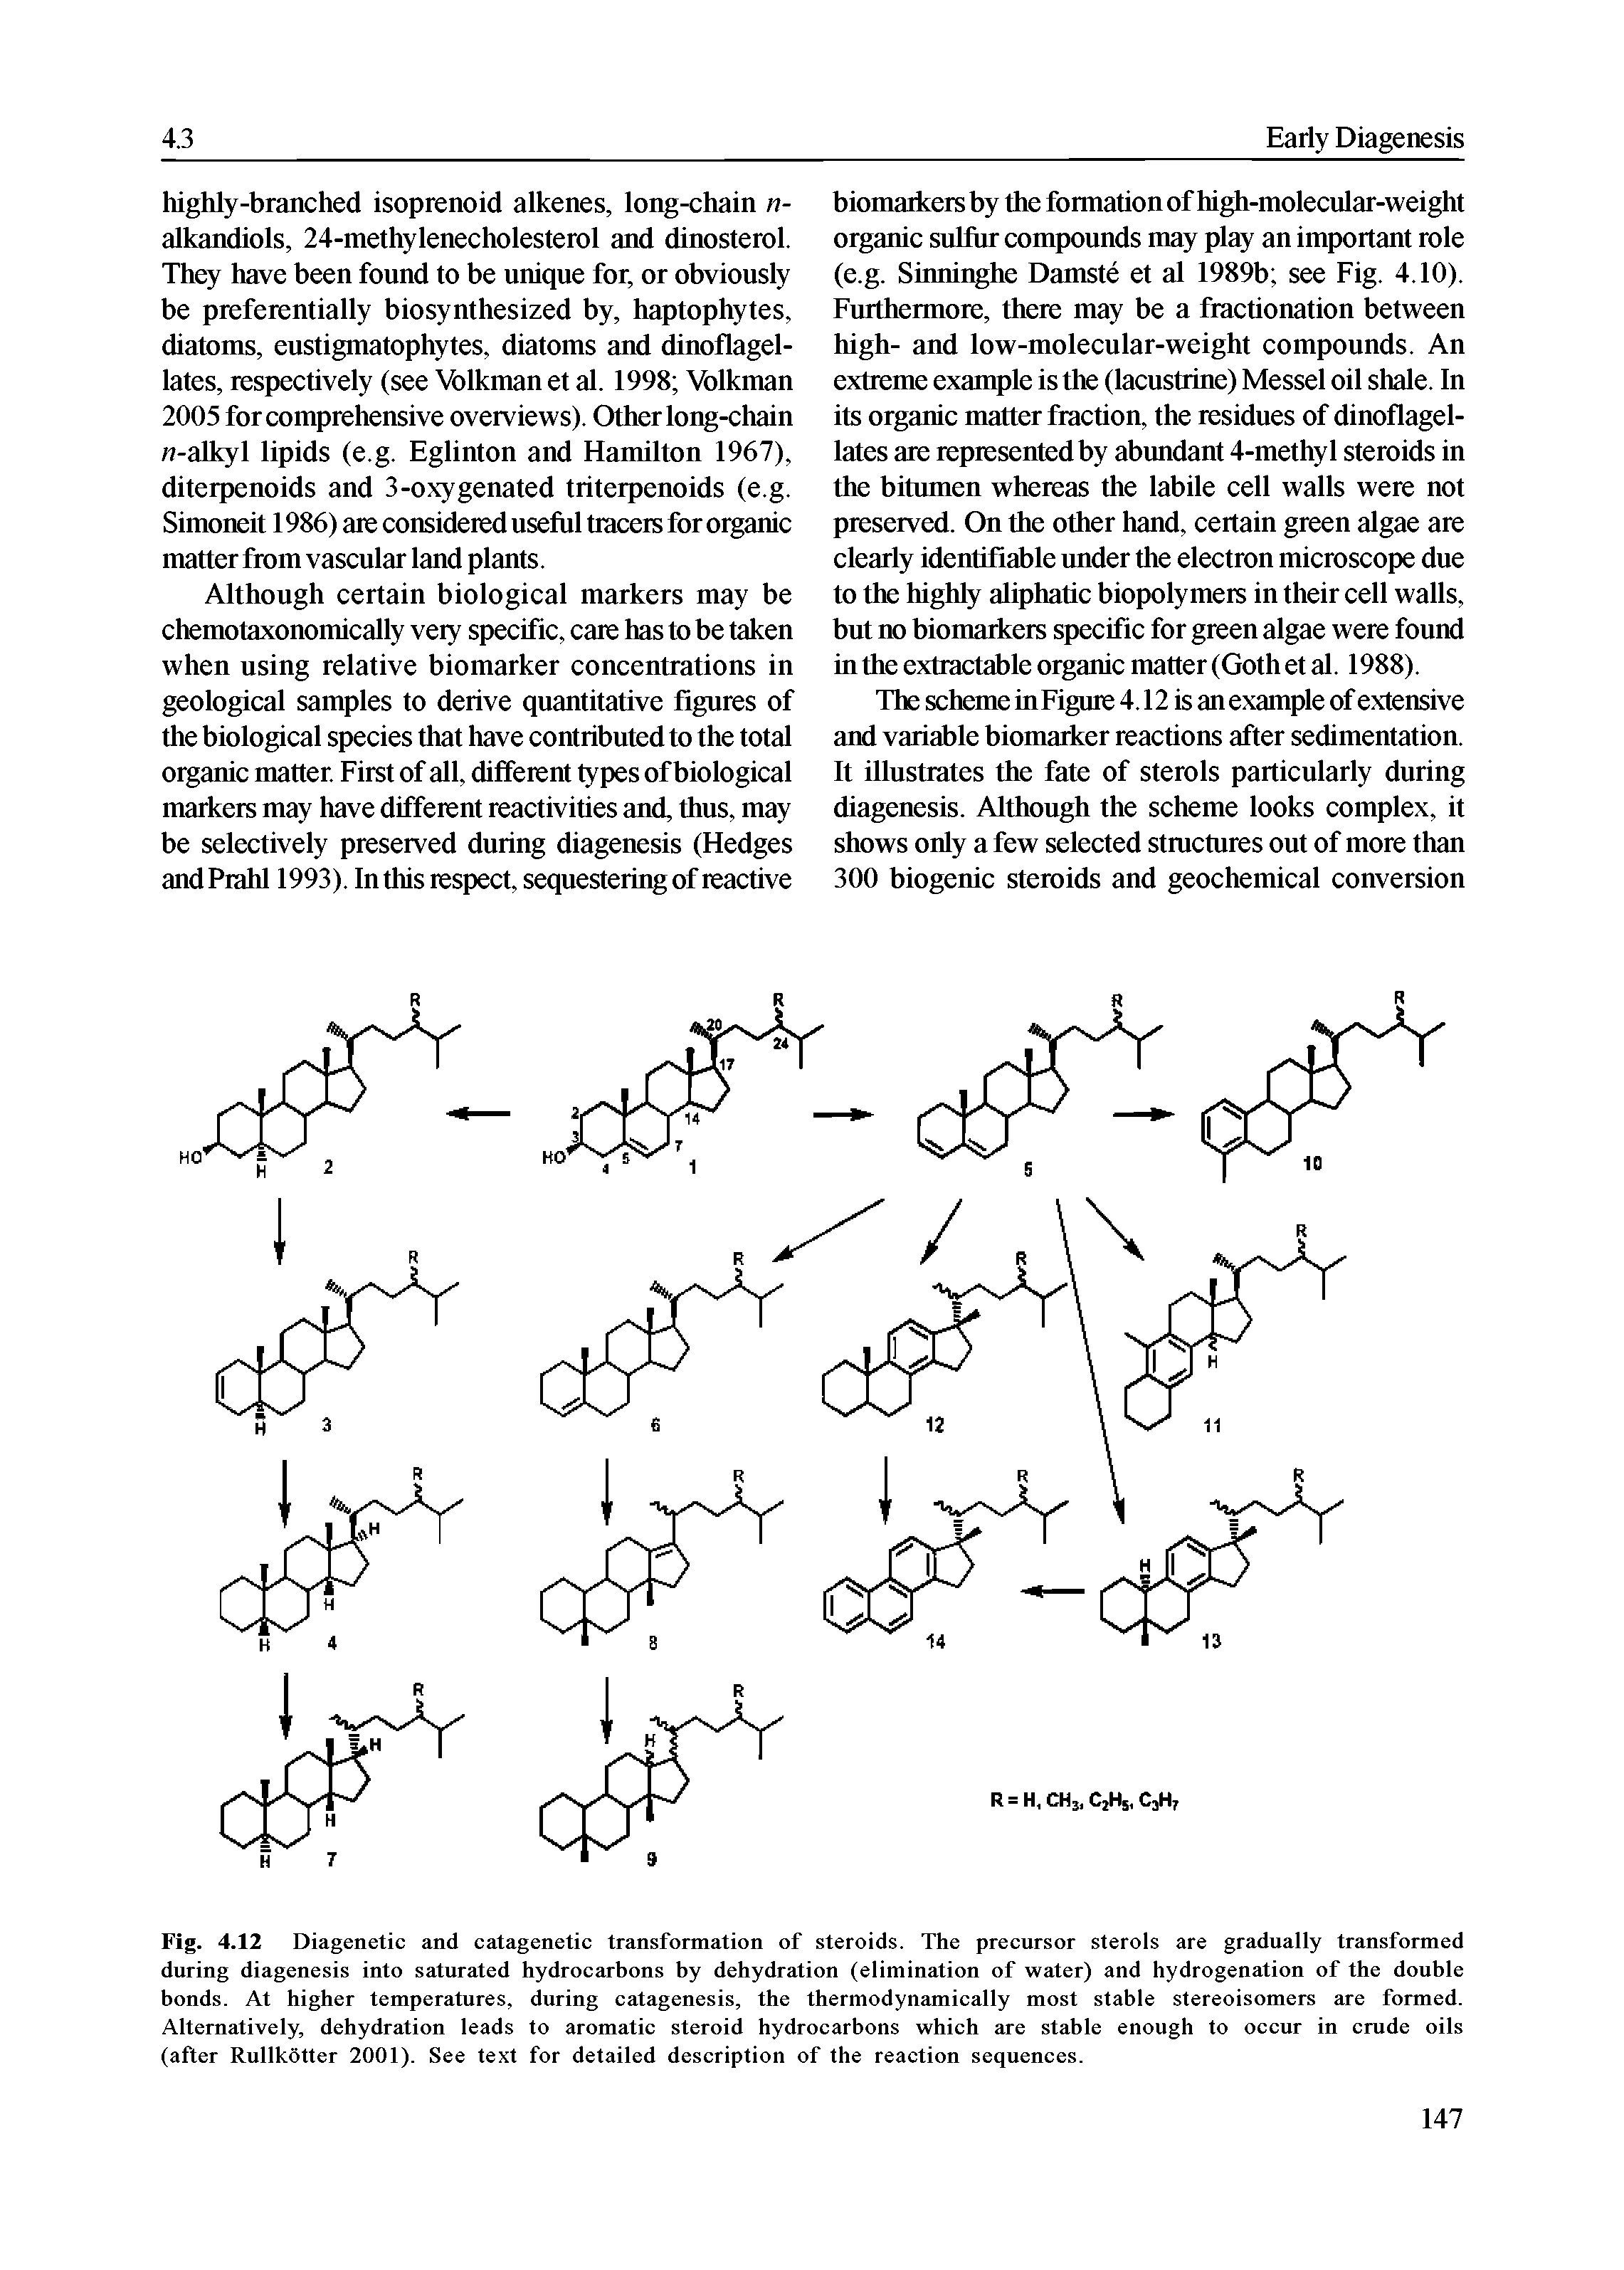 Fig. 4.12 Diagenetic and catagenetic transformation of steroids. The precursor sterols are gradually transformed during diagenesis into saturated hydrocarbons by dehydration (elimination of water) and hydrogenation of the double bonds. At higher temperatures, during catagenesis, the thermodynamically most stable stereoisomers are formed. Alternatively, dehydration leads to aromatic steroid hydrocarbons which are stable enough to occur in crude oils (after Rullkotter 2001). See text for detailed description of the reaction sequences.